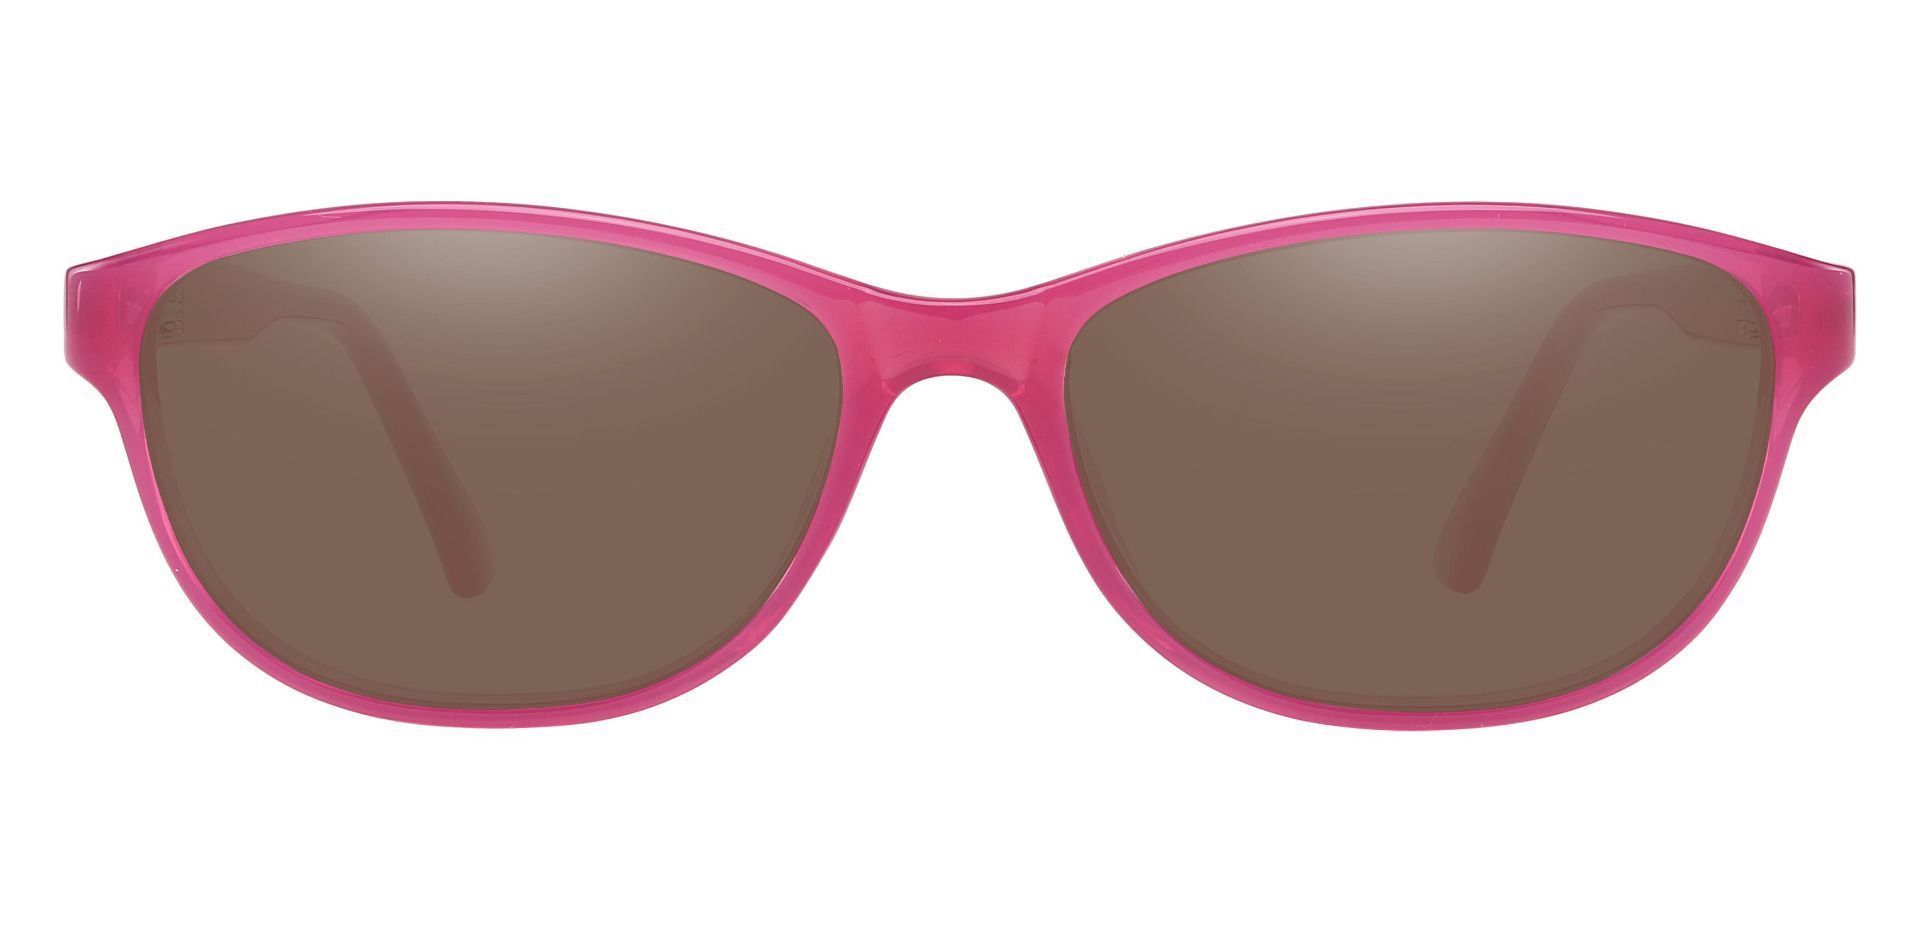 Patsy Oval Lined Bifocal Sunglasses - Pink Frame With Brown Lenses